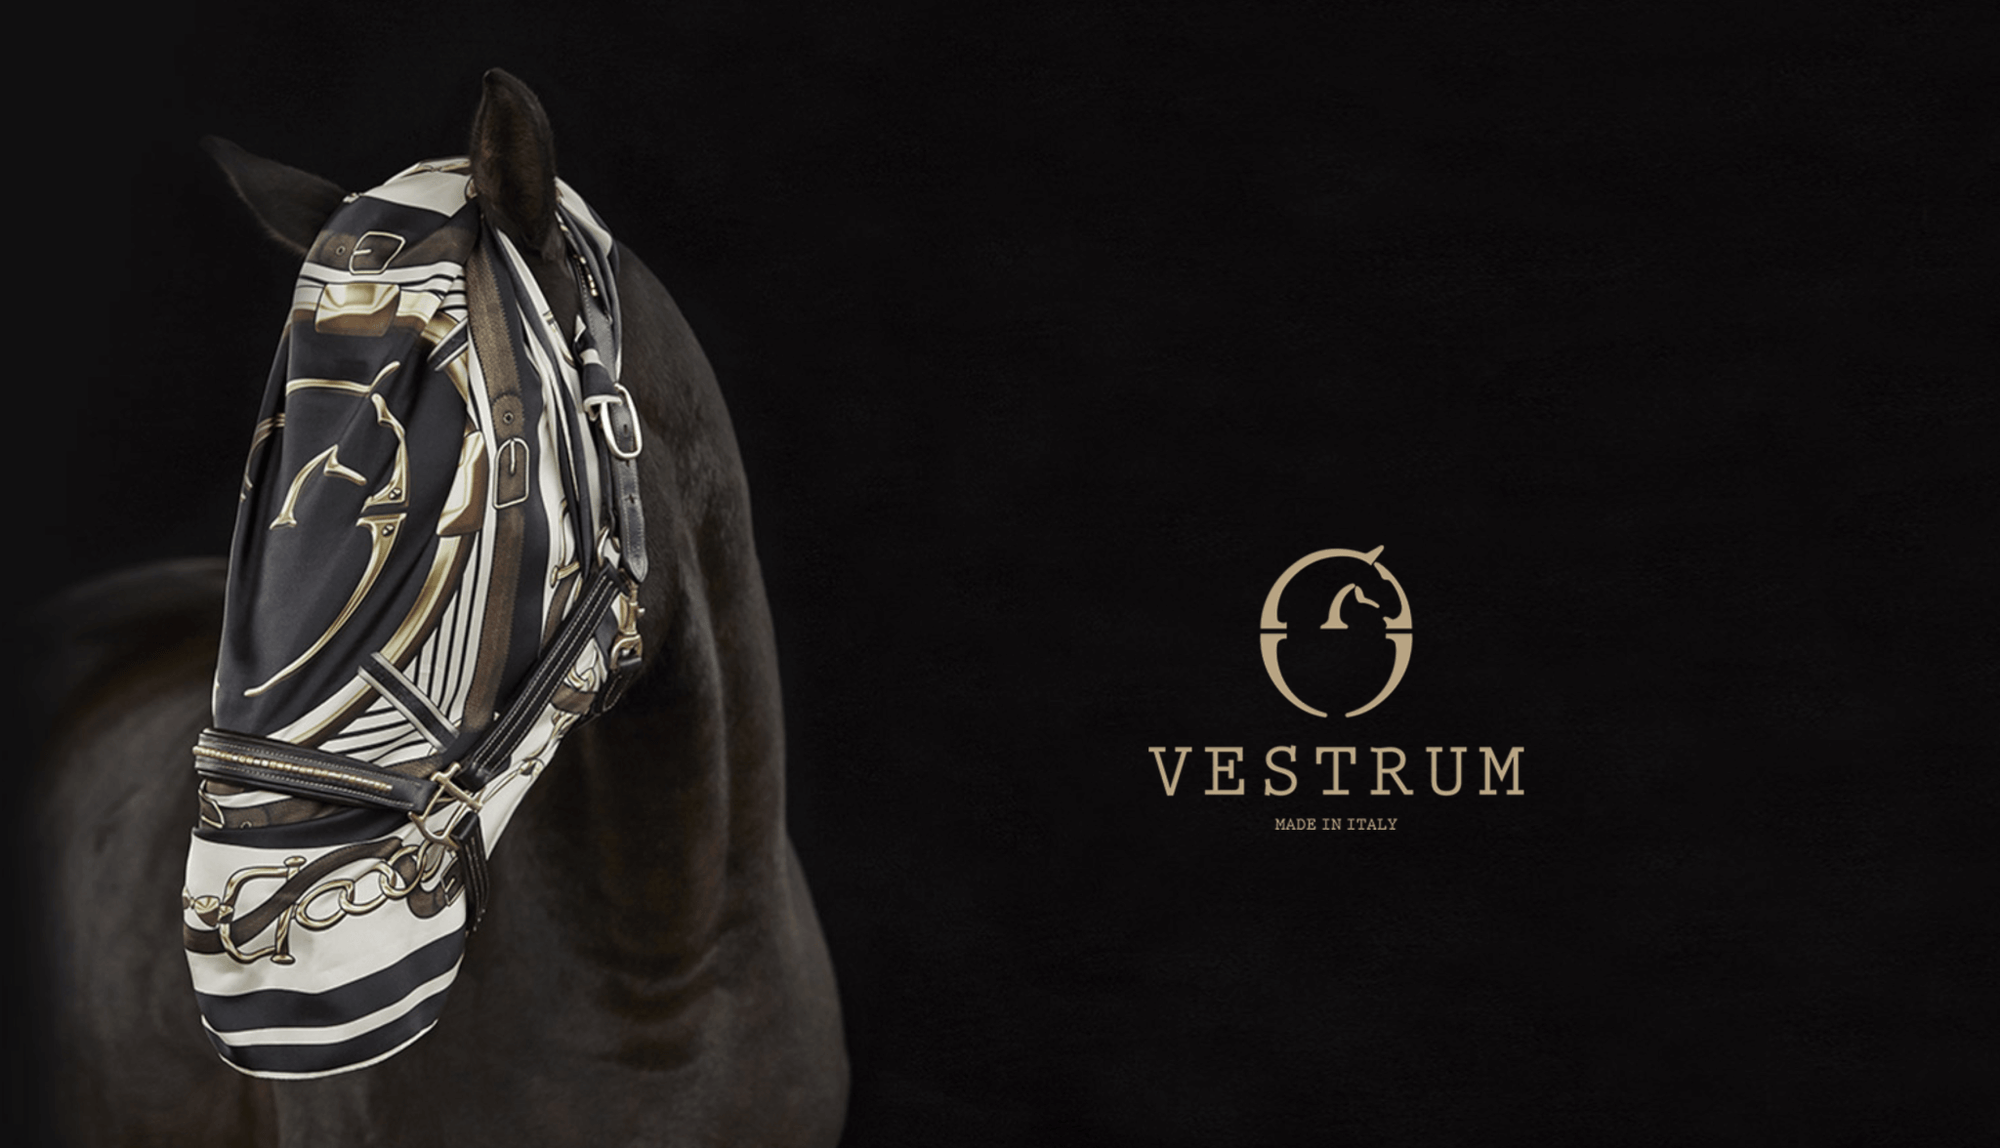 VESTRUM. The brand which shouldn't need an introduction.